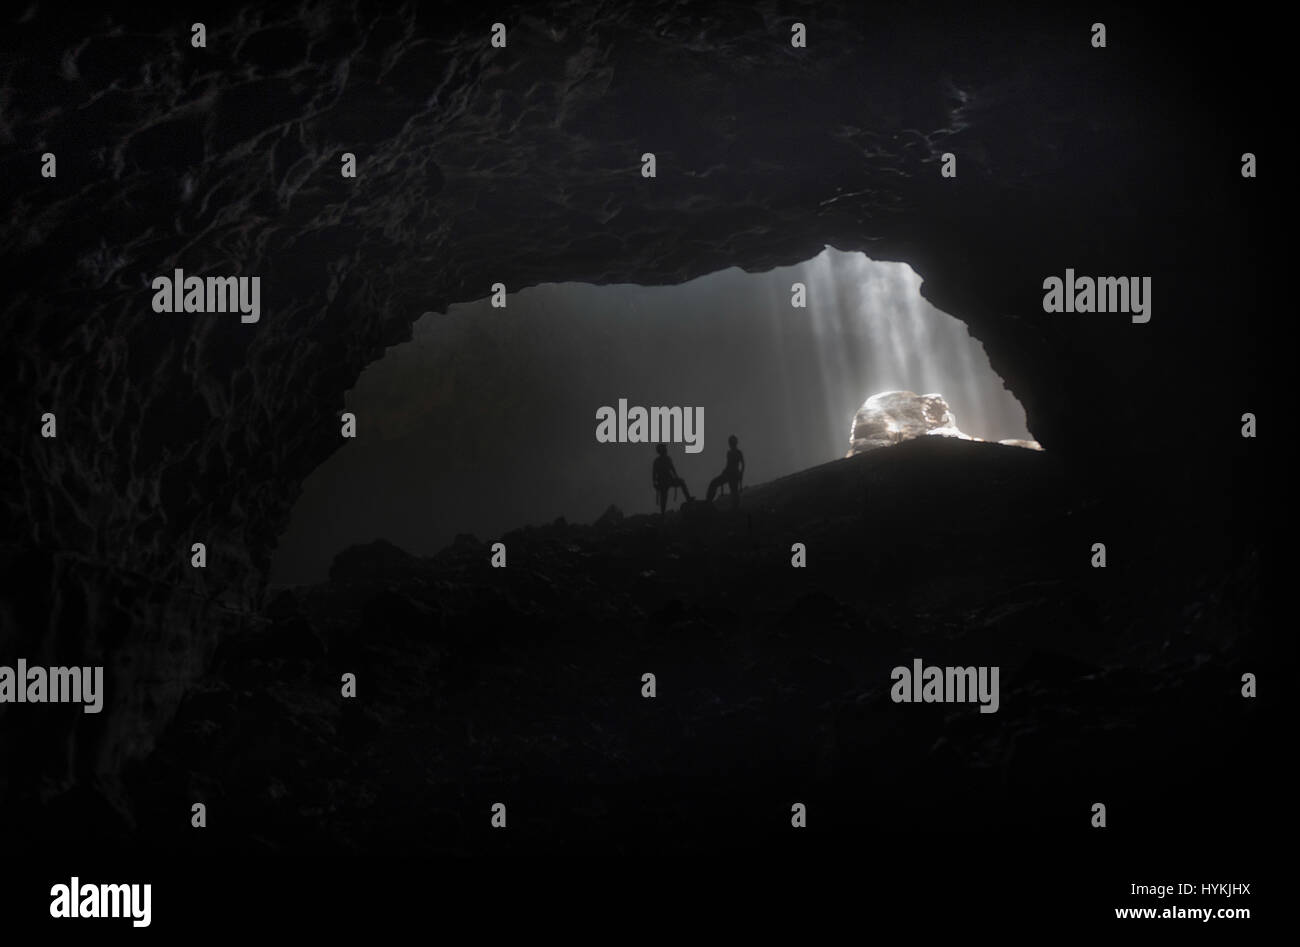 YOGYAKARTA, INDONESIA: INCREDIBLE abseiling pictures from a three hundred-foot deep vertical cave with a dark history have been captured by a husband and wife team. Pictures and video show the sheer scale of the ascent into the black cave highlighted by sun rays peeping through the mouth of the hollow. The eerie abseil into the black took place in Indonesia’s Jomblang Cave, dubbed ‘massacre cave’ due to its ghastly past where in 1965 hundreds of members of the PKI, Communist party of Indonesia, were allegedly taken and massacred.  Stories surrounding this cave still haunt the local villagers a Stock Photo